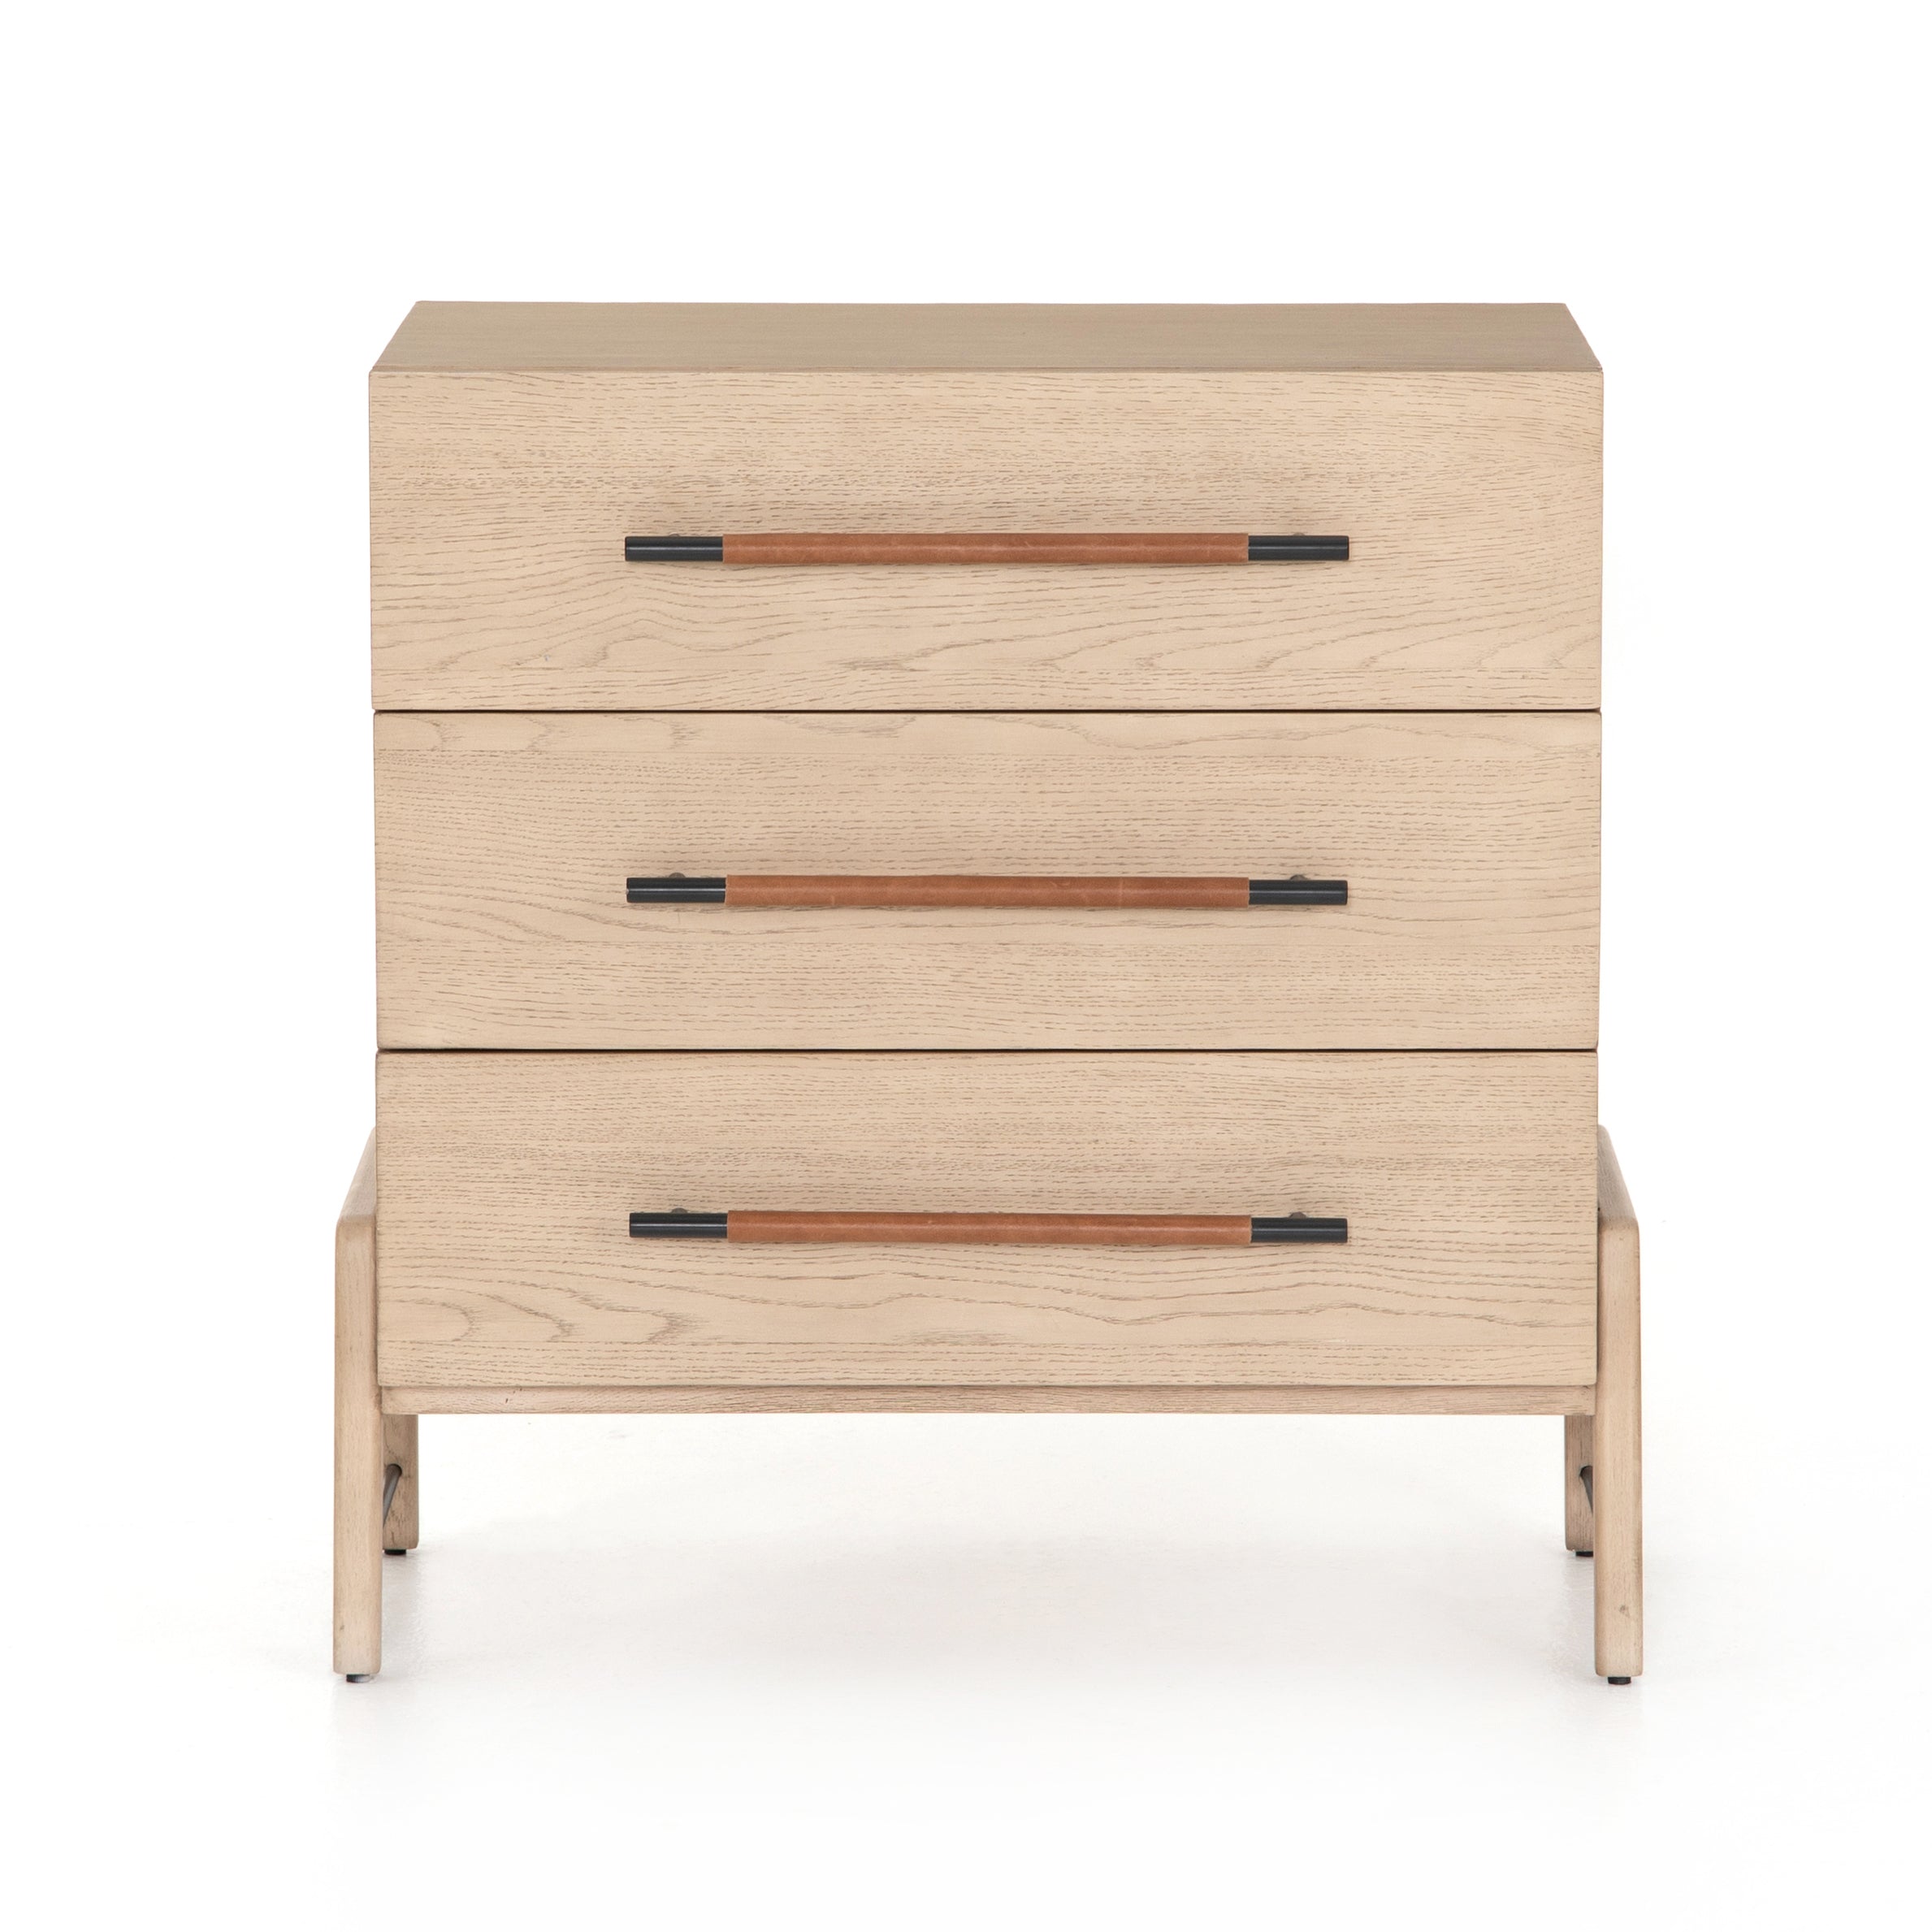 The light-finished oak of this Rosedale 3 Drawer Dresser brings a clean, brightness to any room. We love how the three spacious drawers have iron hardware wrapped in a gorgeous, tan leather. The dimension legs with iron connecting them bring a unique look to your bedroom or other area!  Overall Dimensions: 32.50"w x 19.50"d x 32.50"h